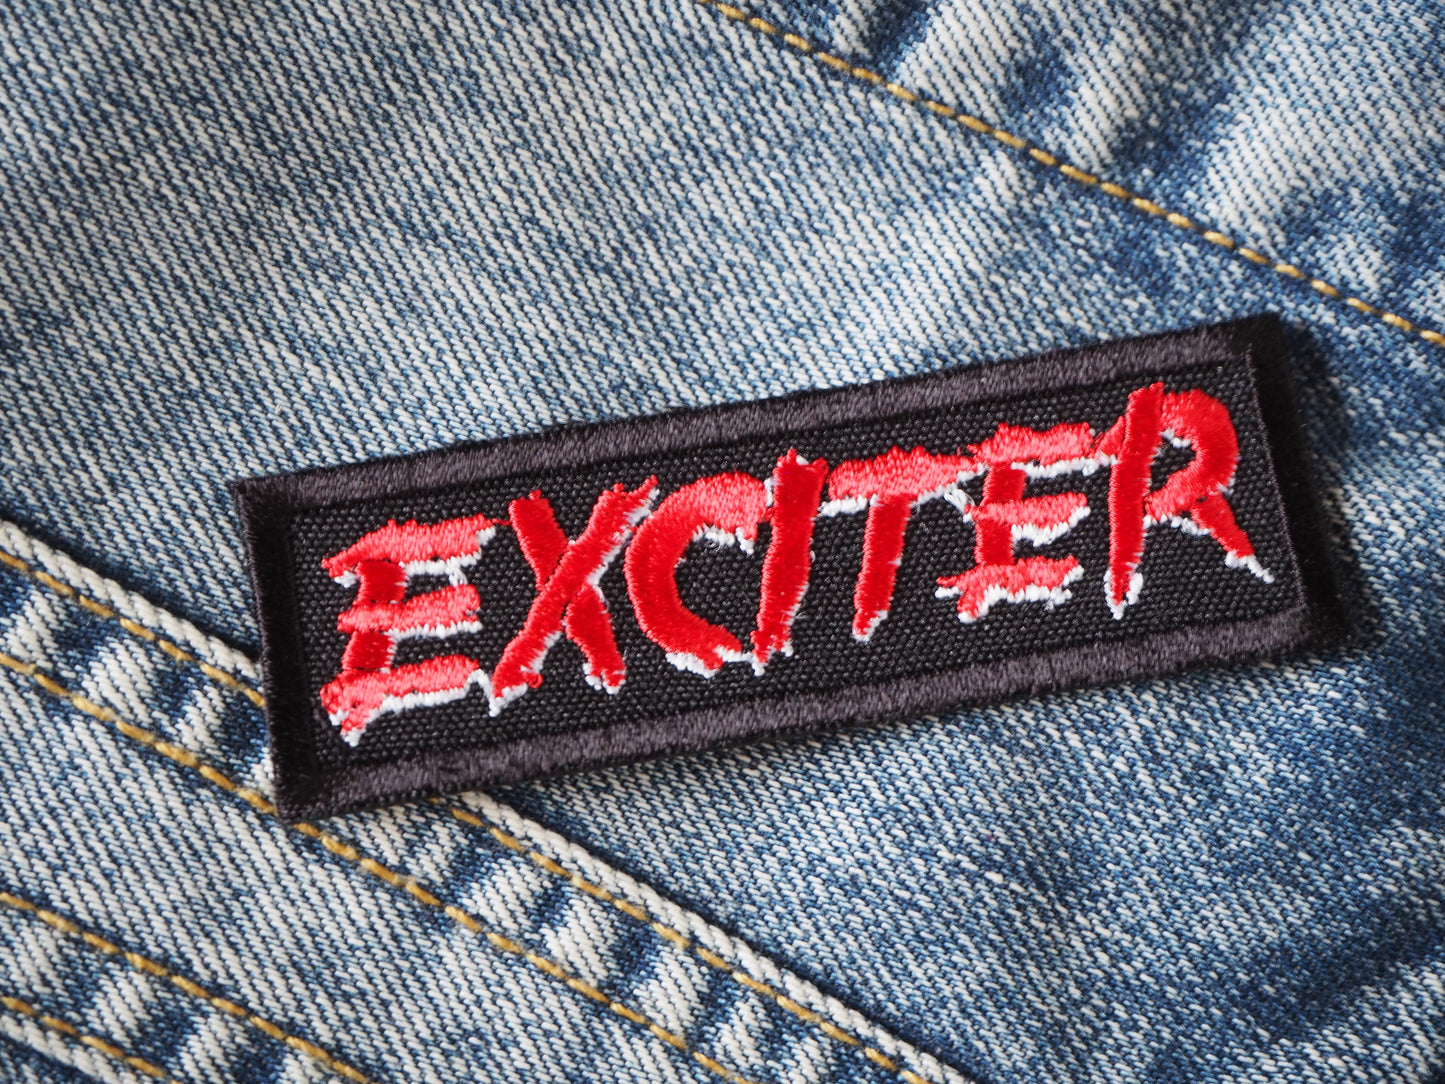 Excіter Patch